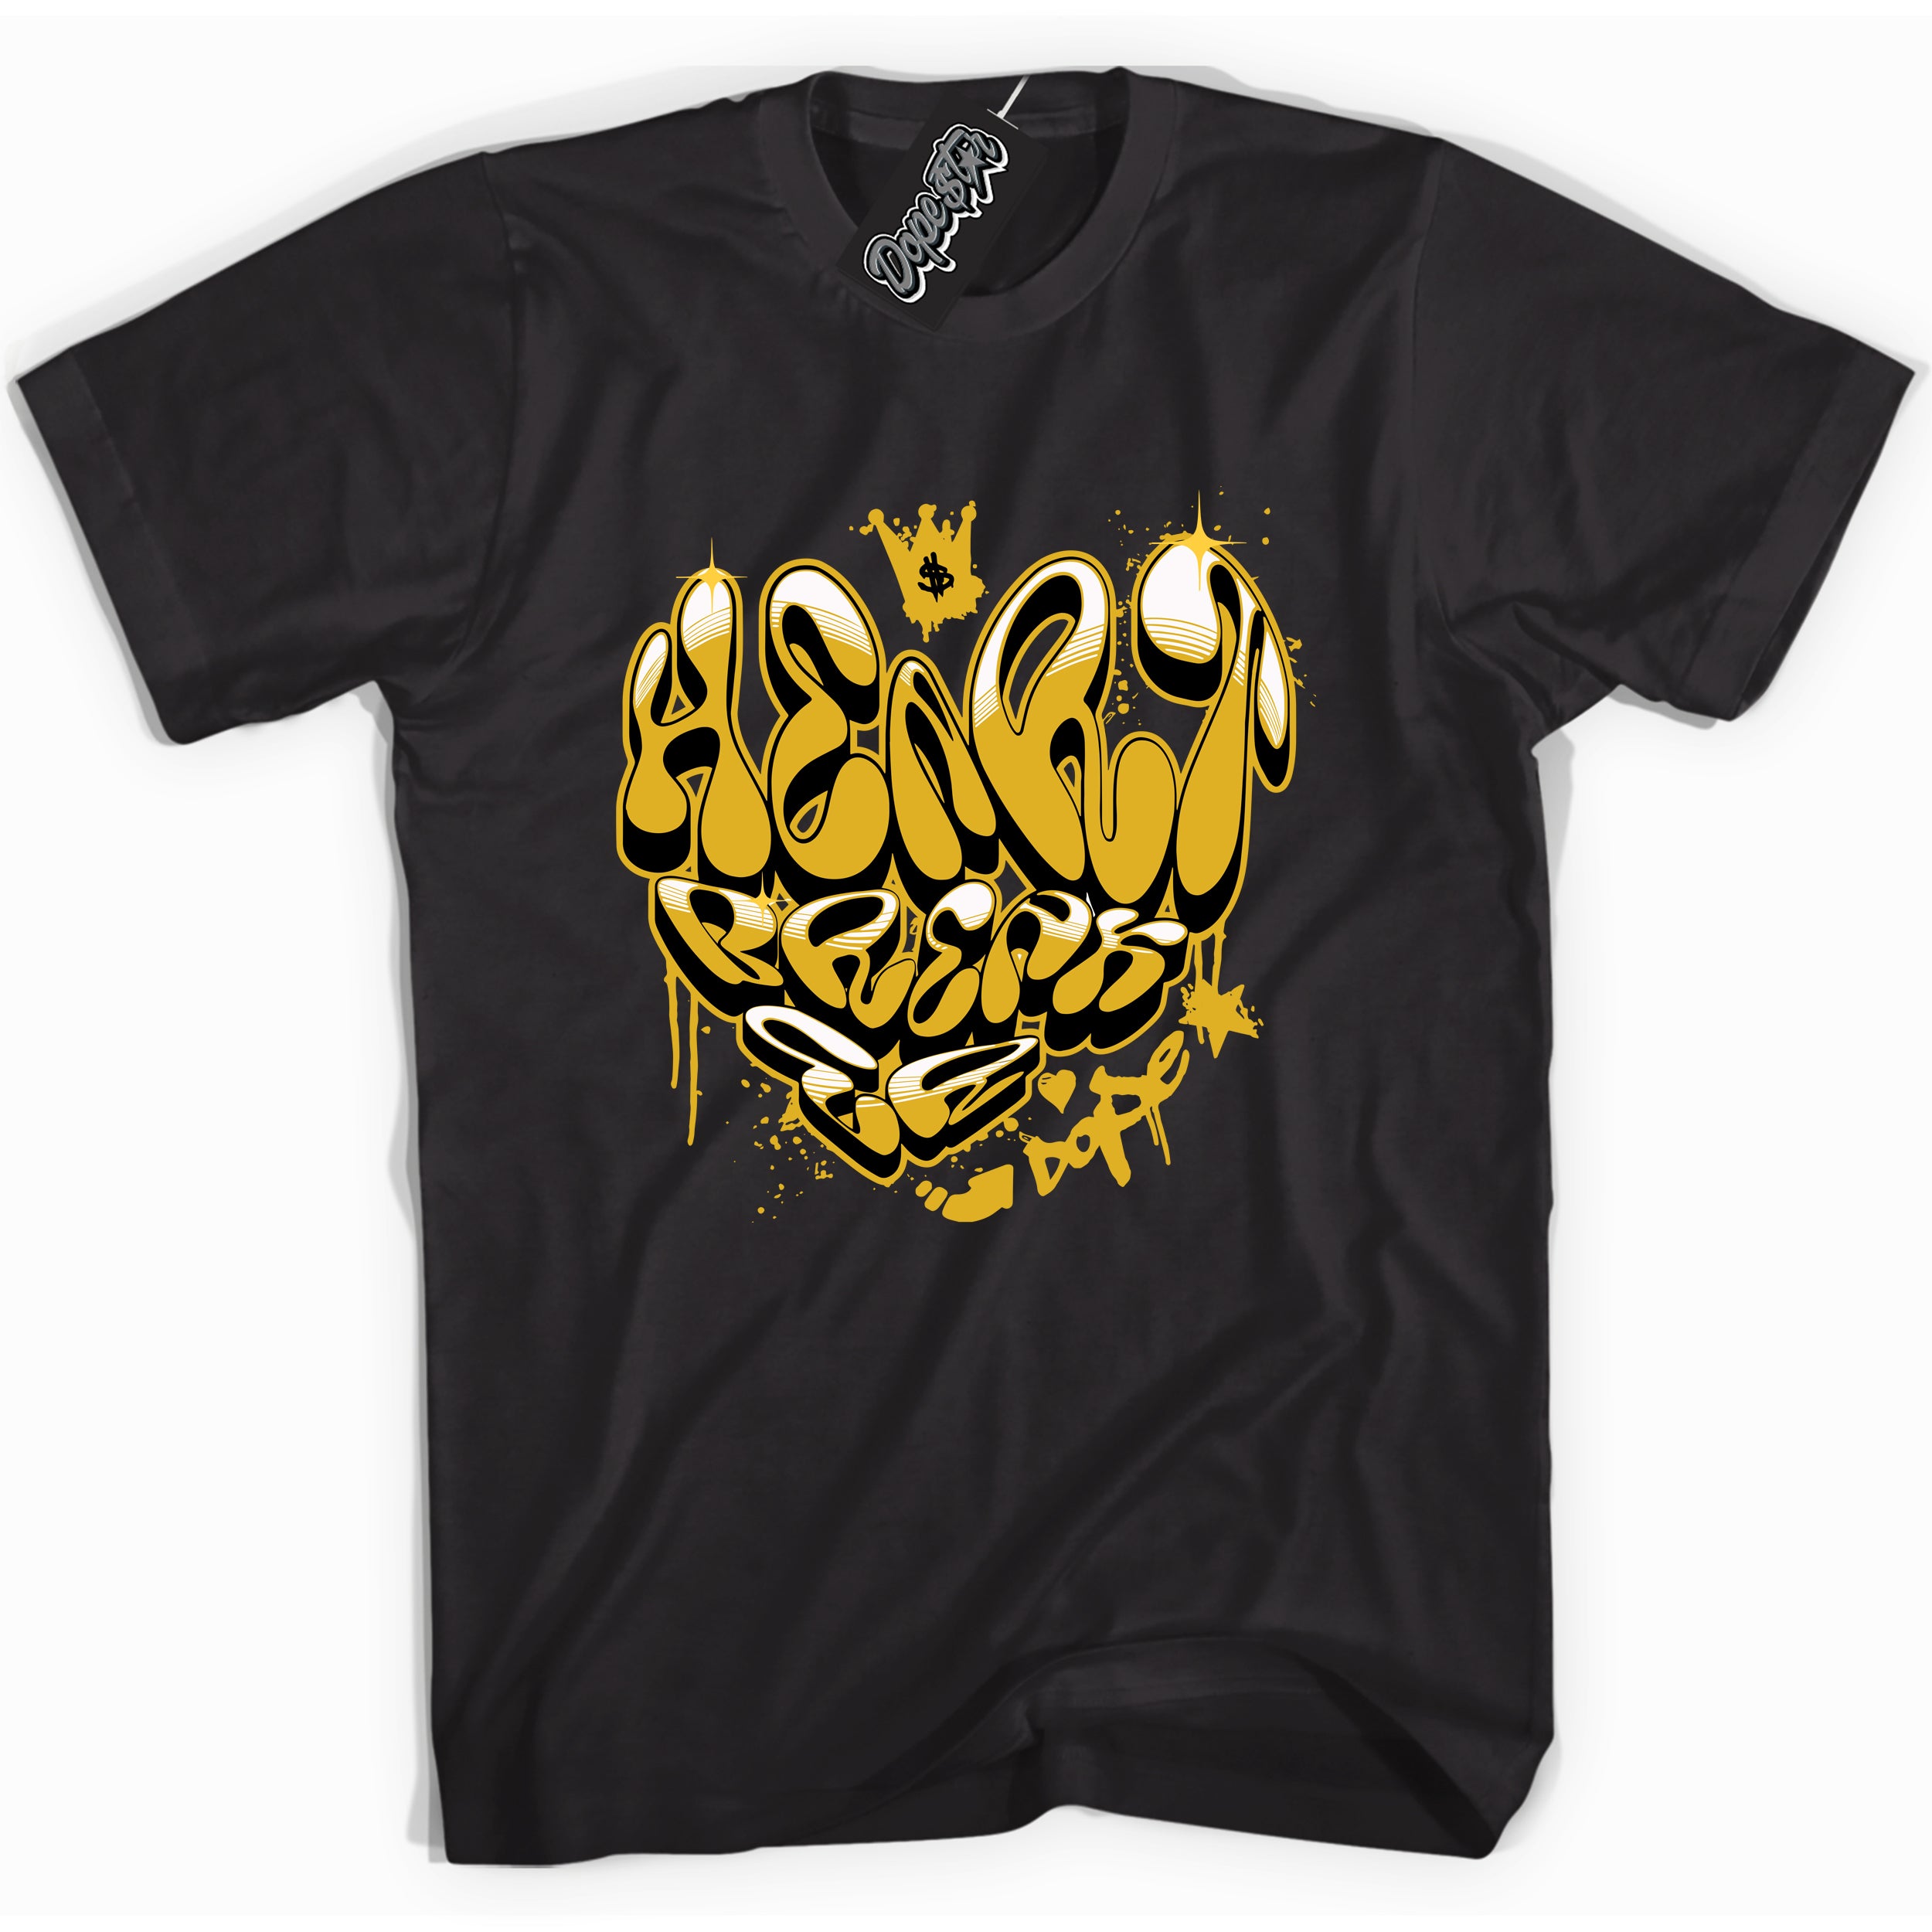 Cool Black Shirt with “ Heartbreaker Graffiti” design that perfectly matches Yellow Ochre 6s Sneakers.